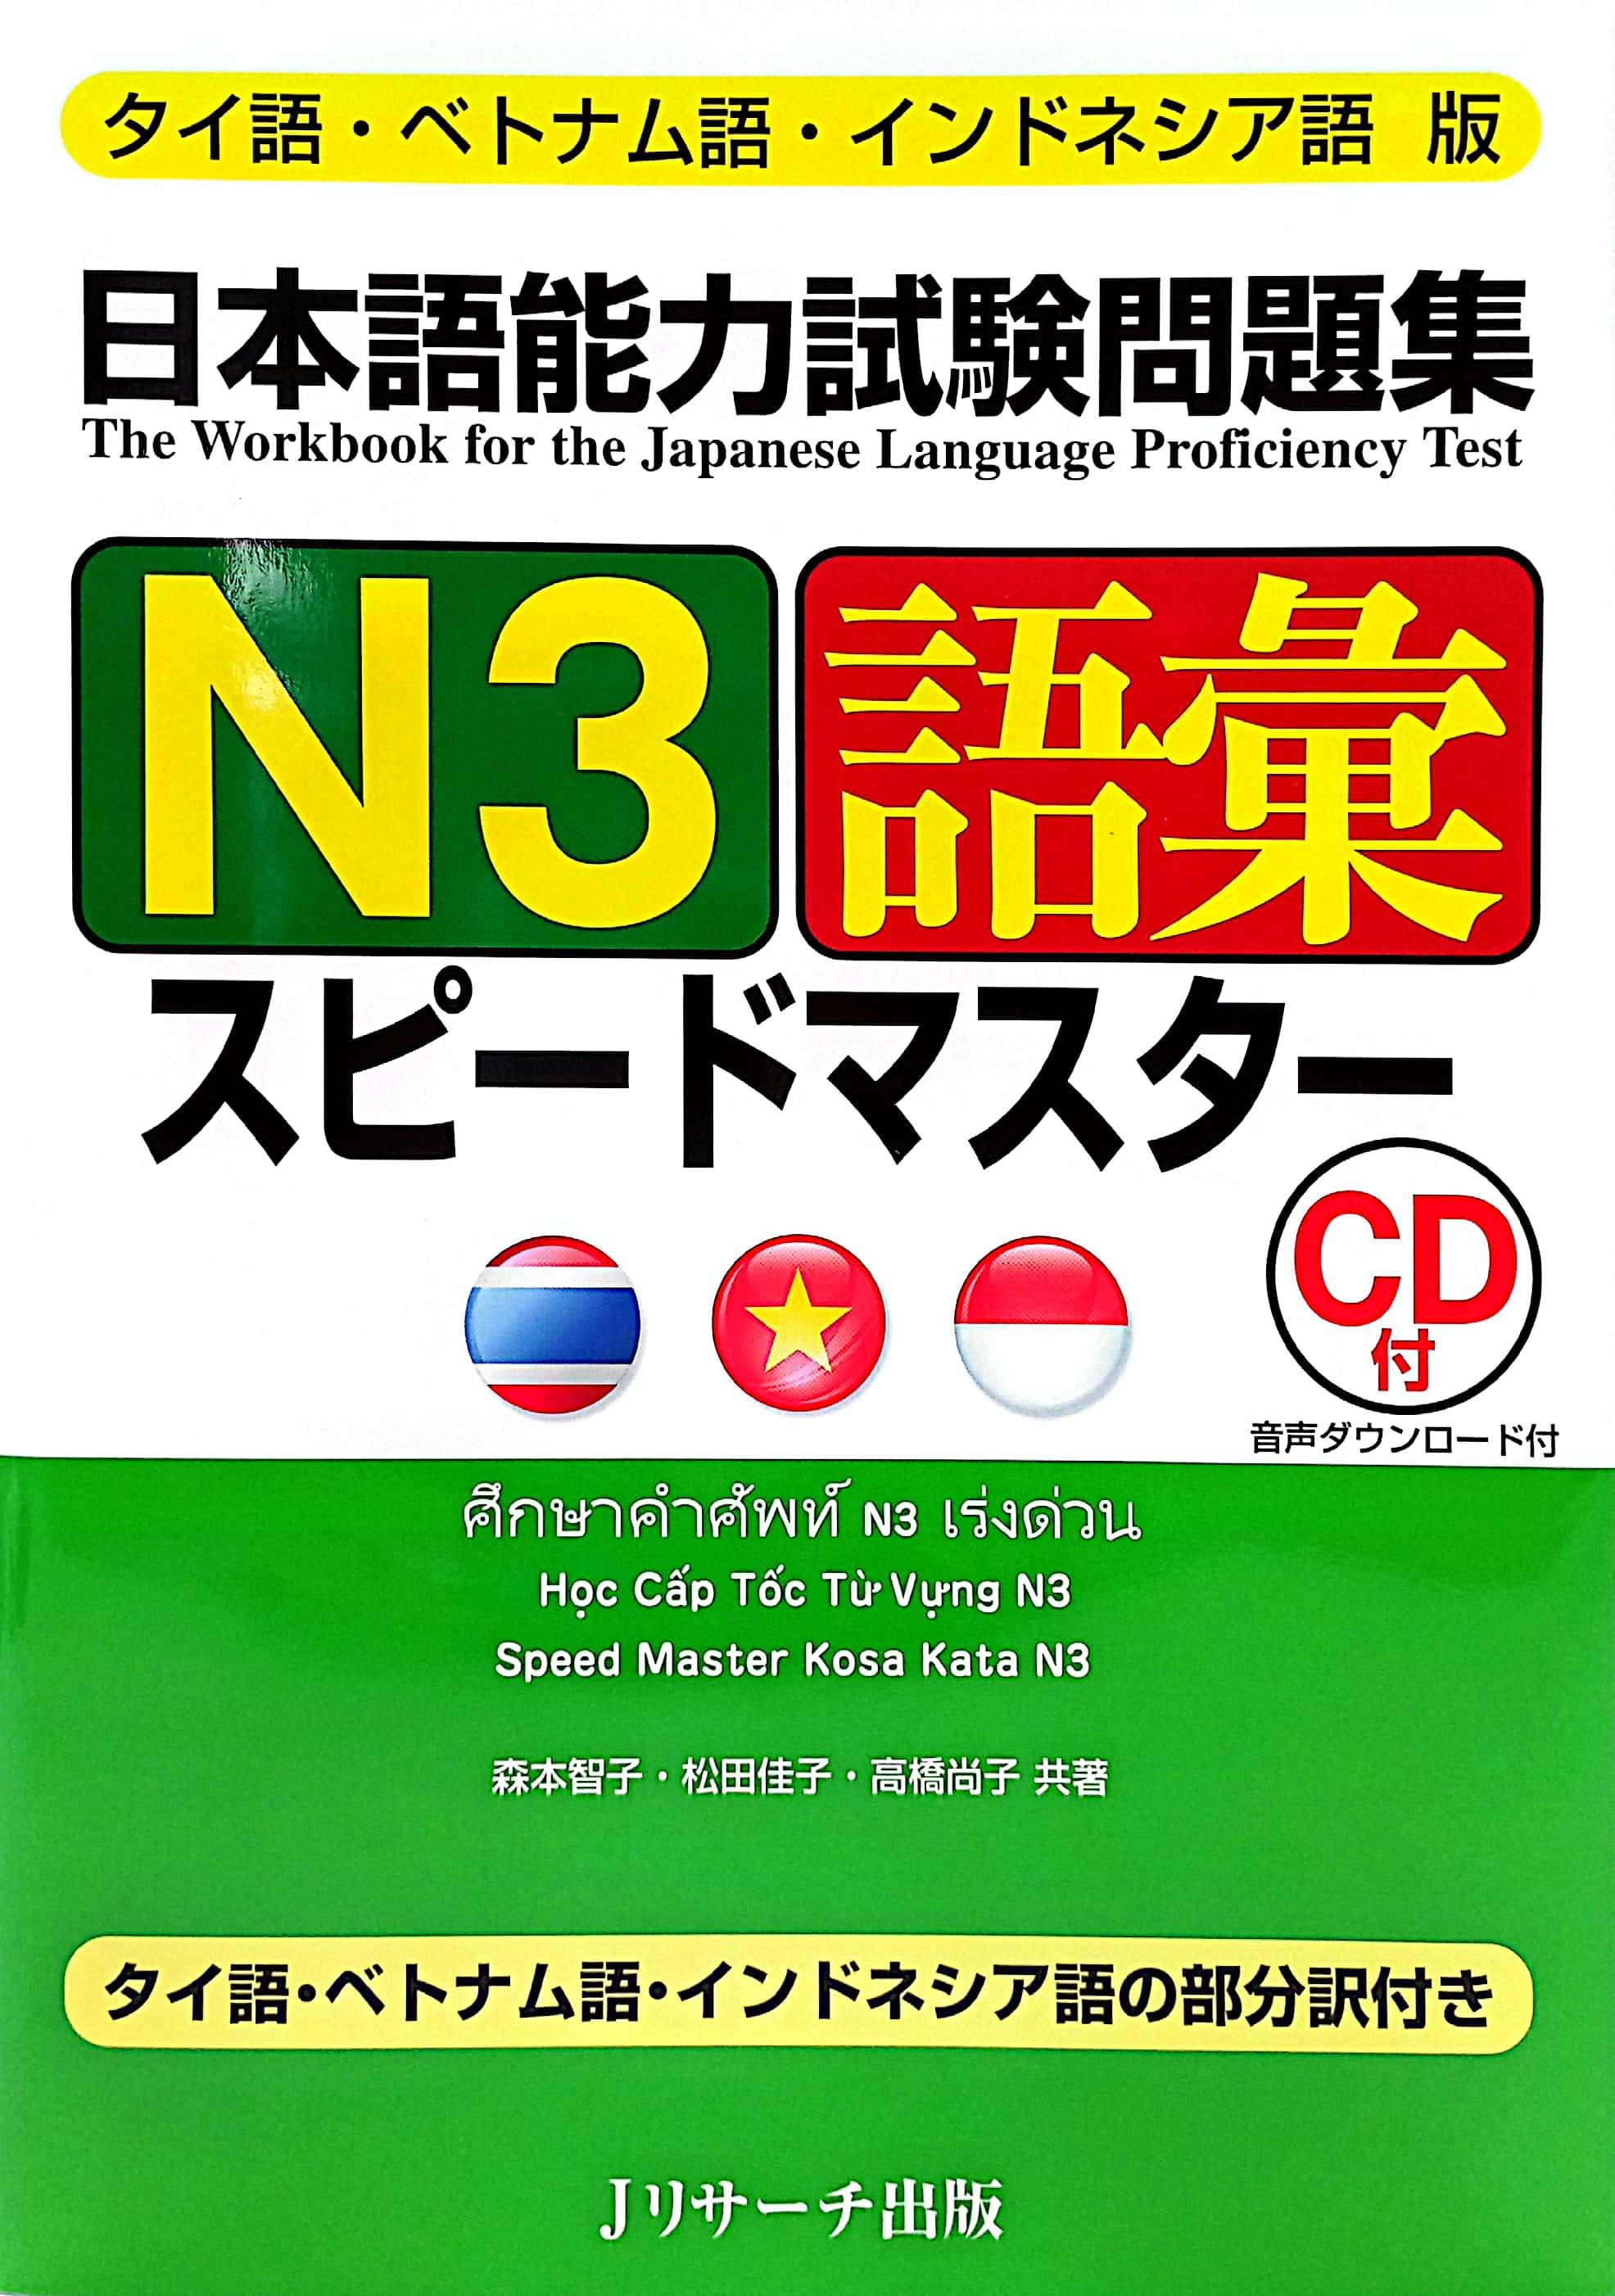 Japanese Language Proficiency Test Official Exercise Book N 3 Goi Speed Master Tai Go Vietnam Go Indonesia Go Ban (Japanese Edition)